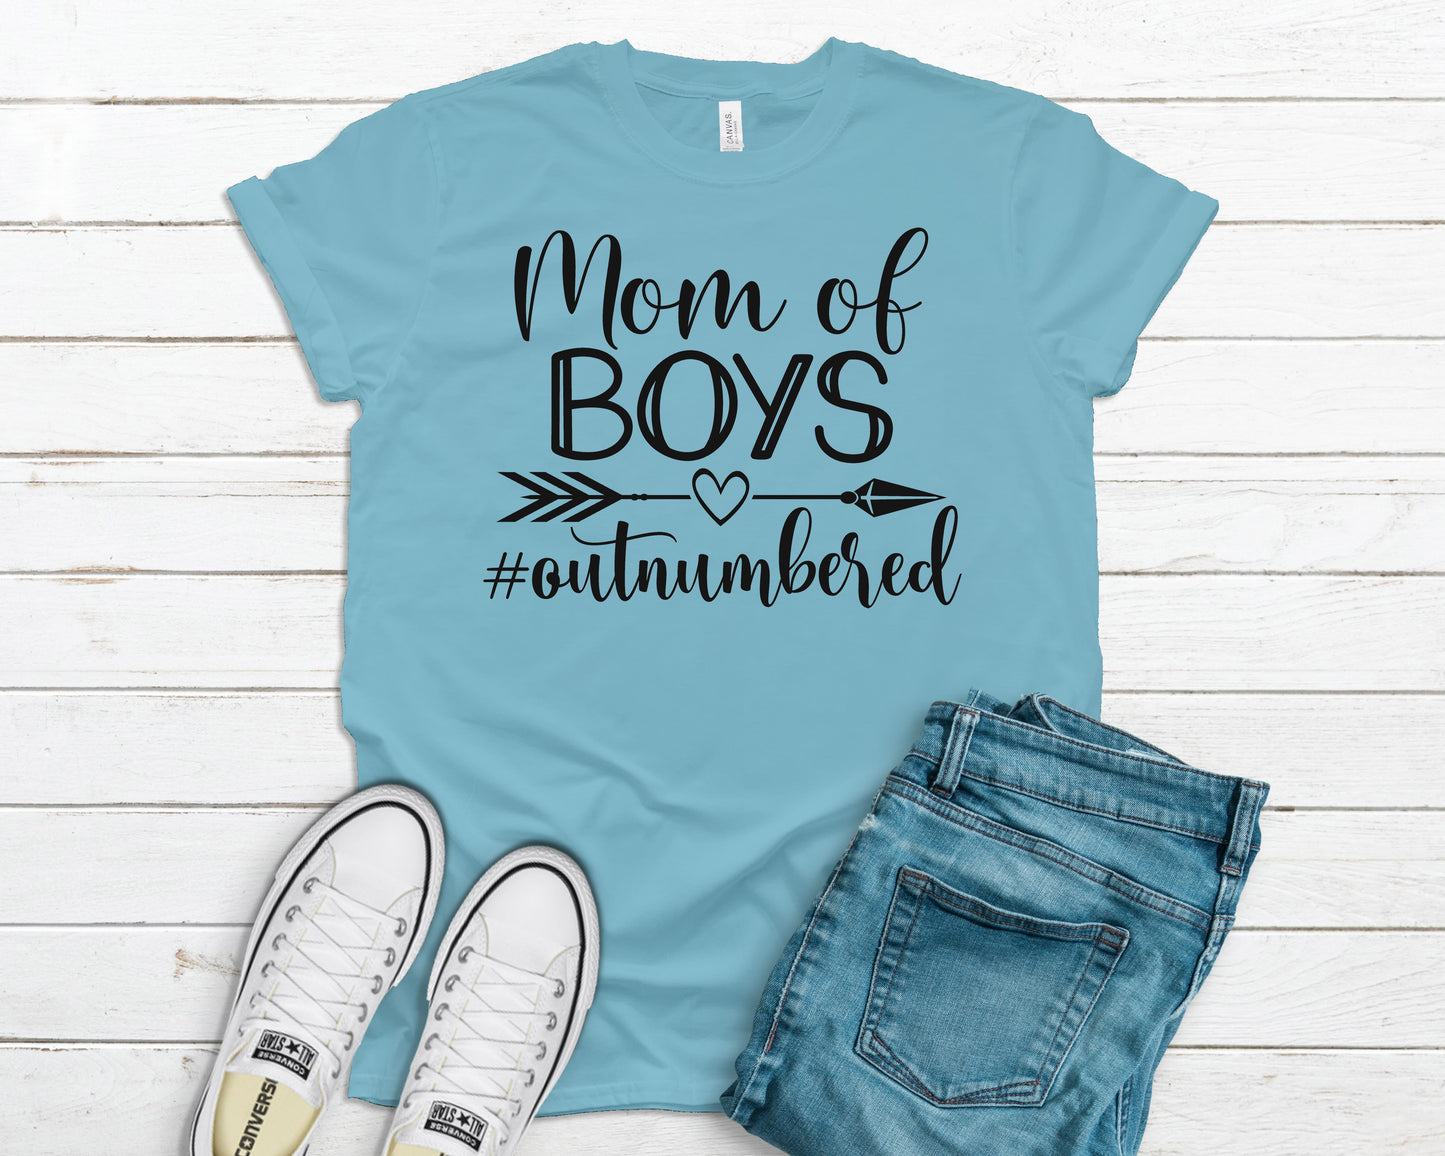 Mom of boys outnumbered